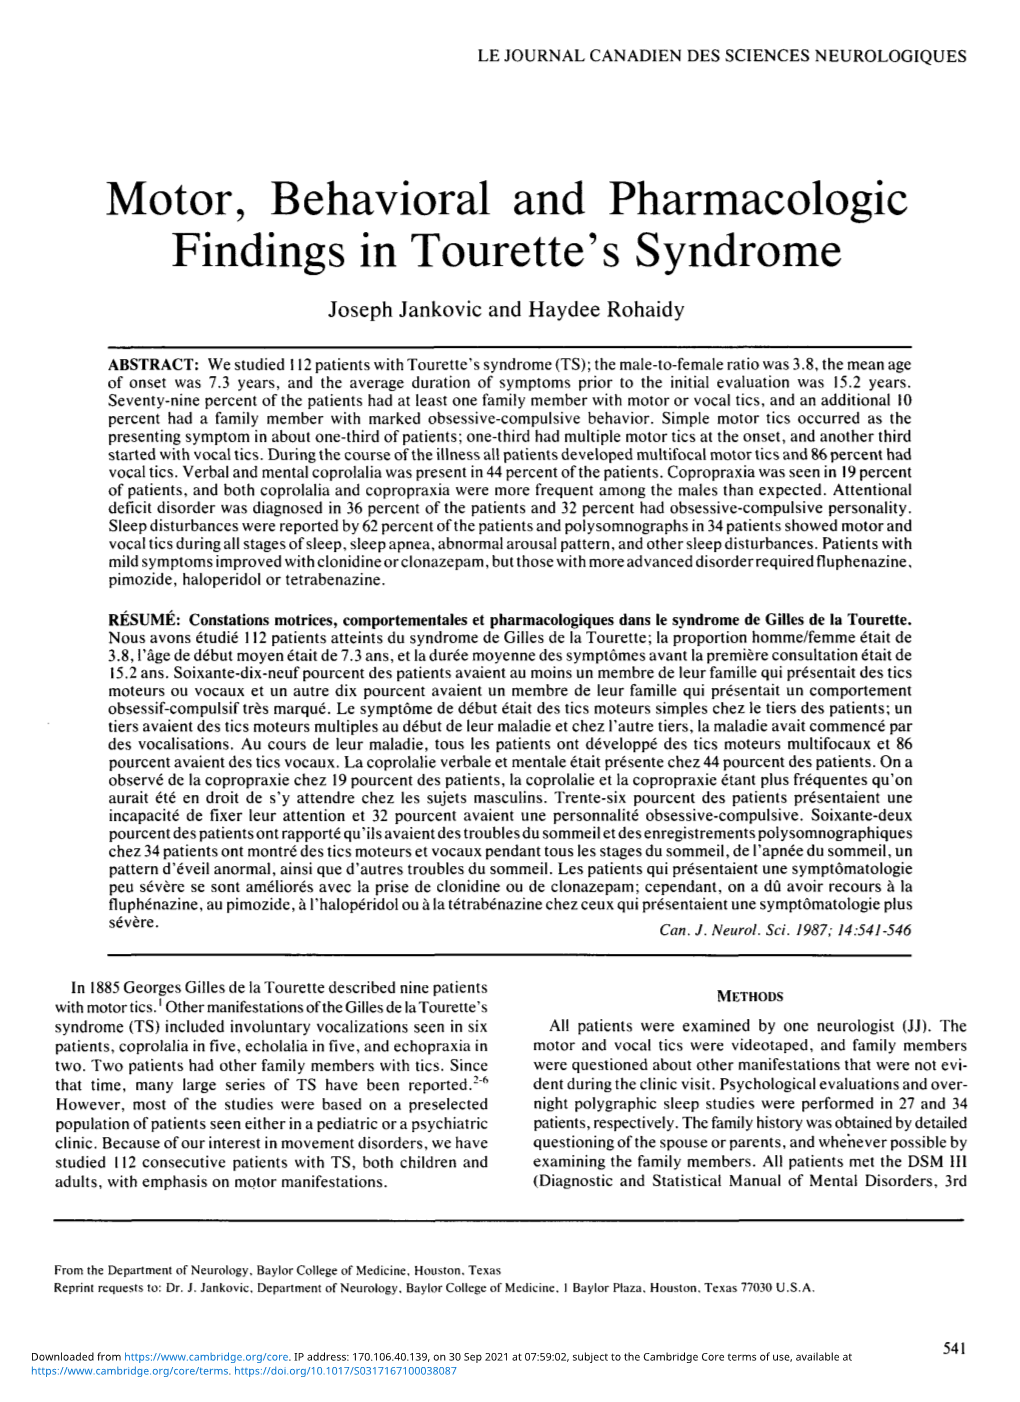 Motor, Behavioral and Pharmacologic Findings in Tourette's Syndrome Joseph Jankovic and Haydee Rohaidy